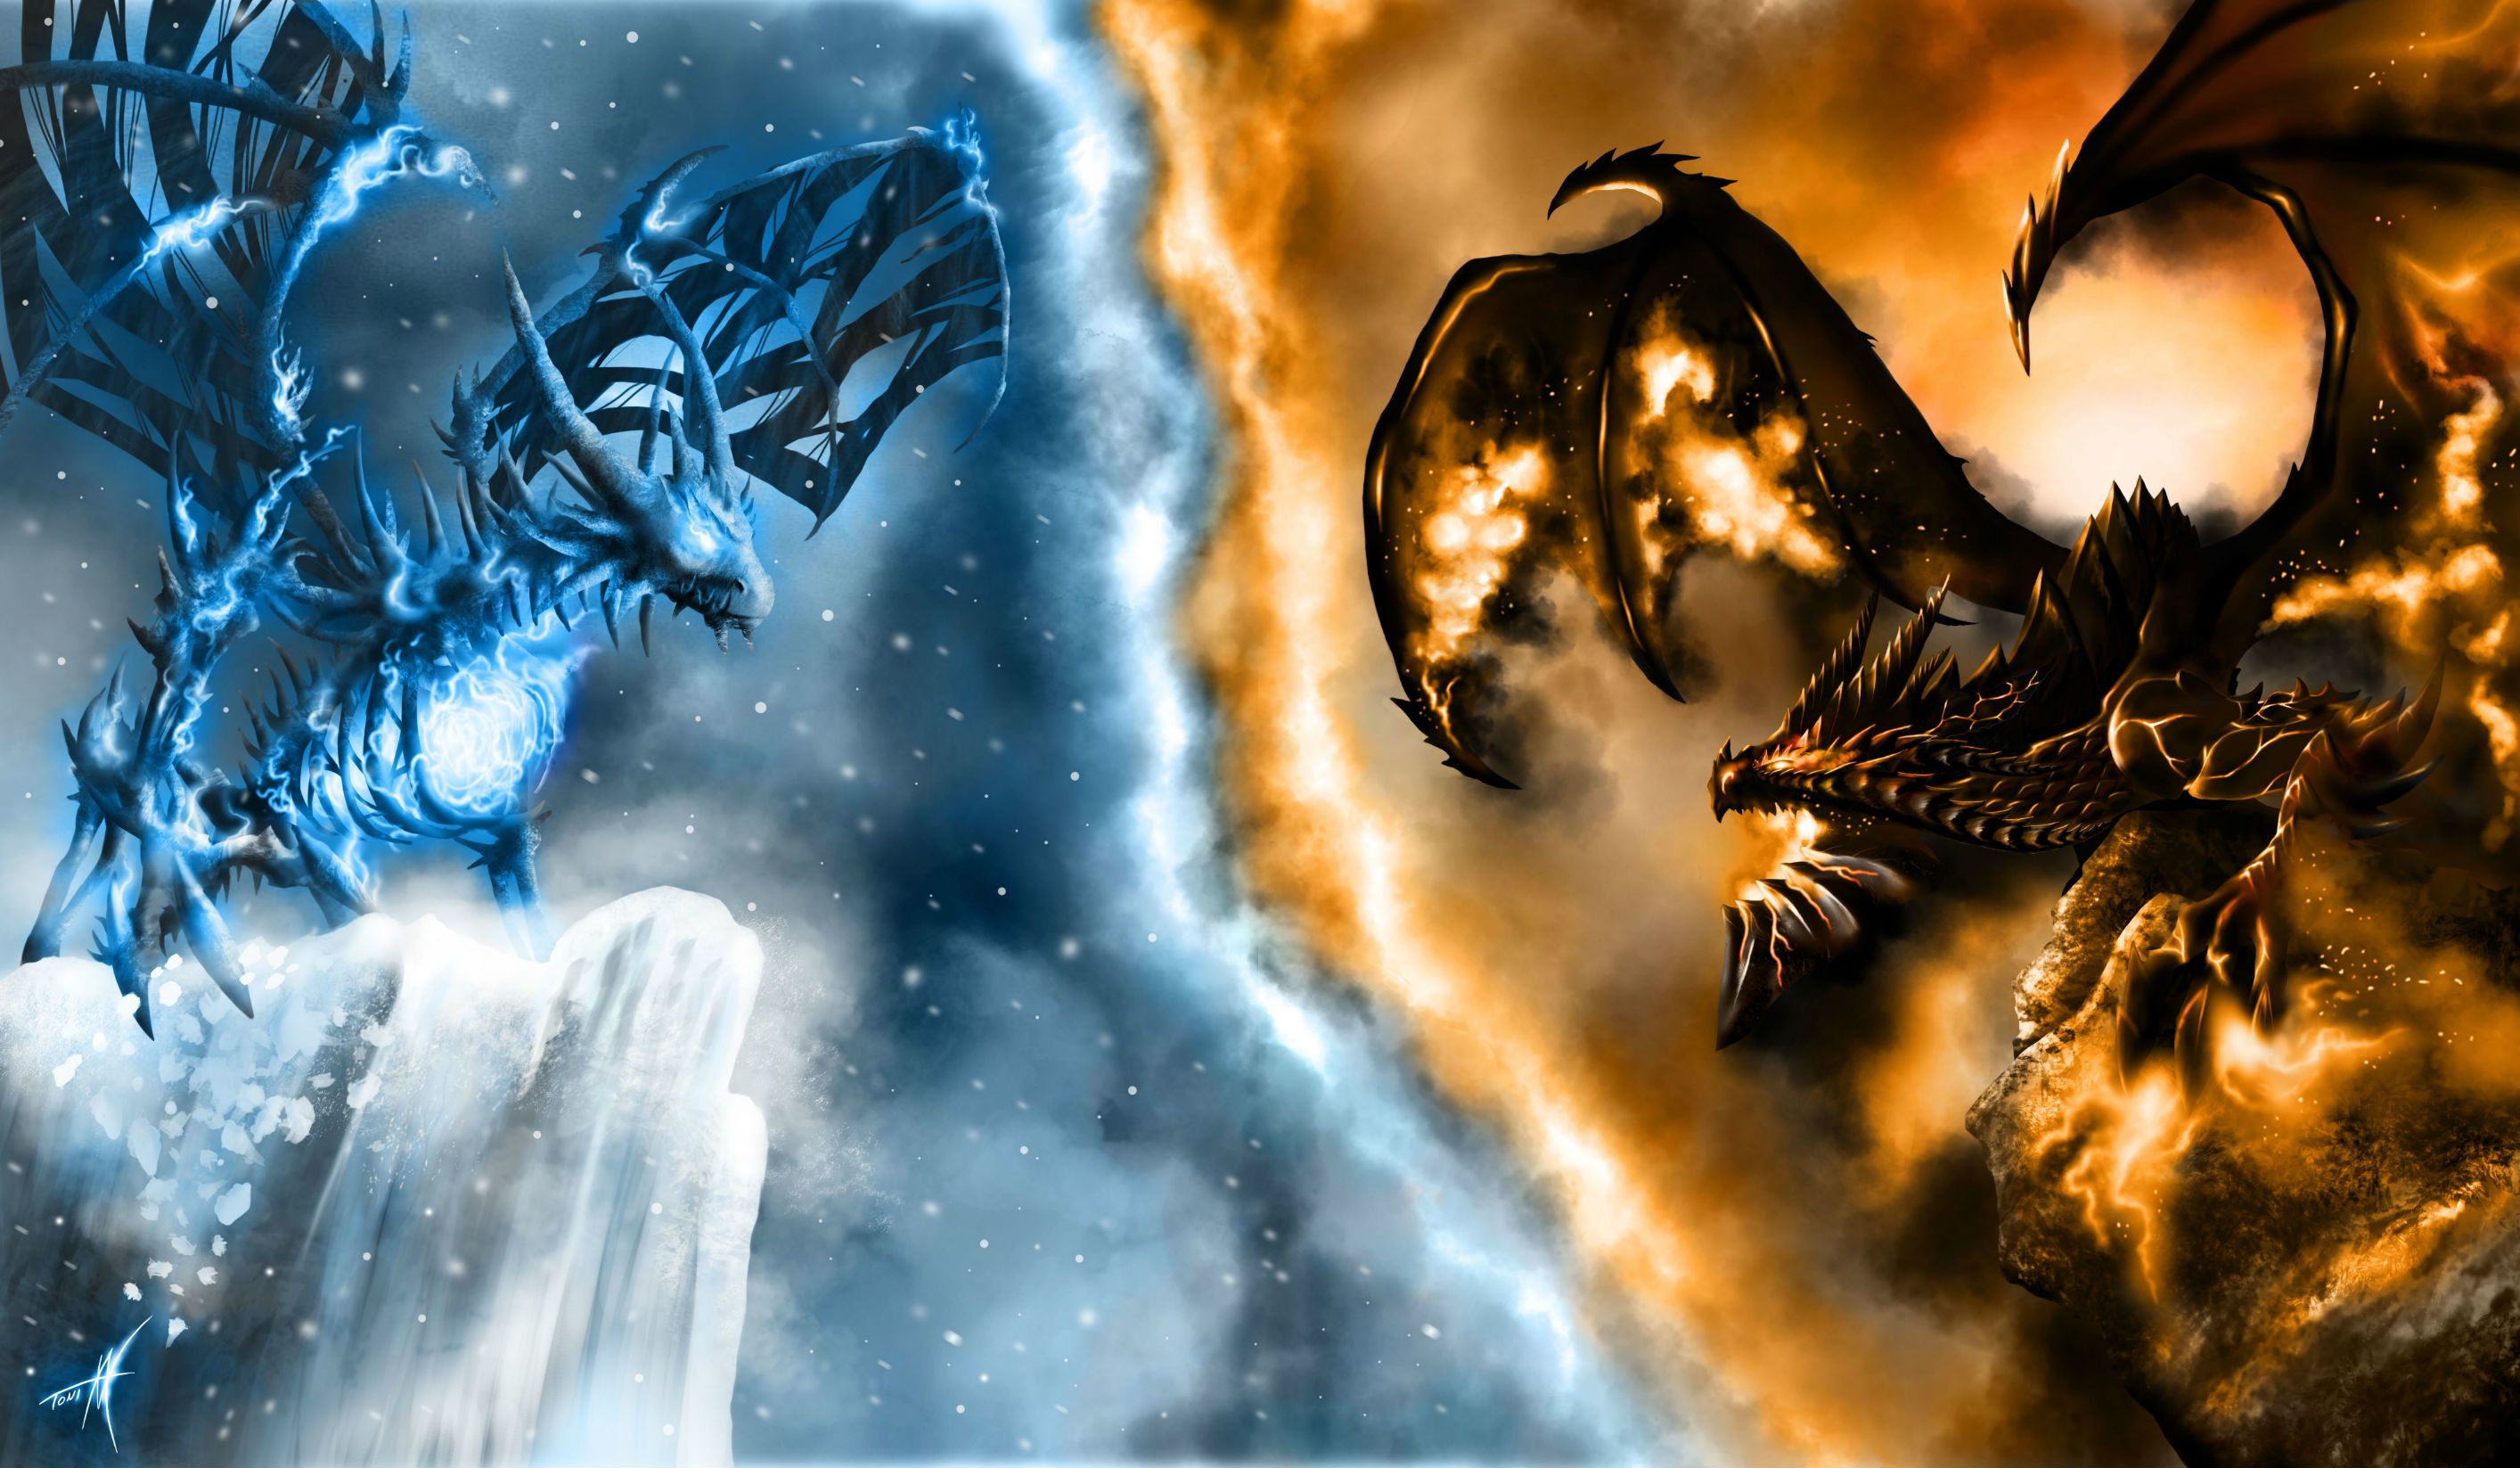 Fire and Ice Wallpaper